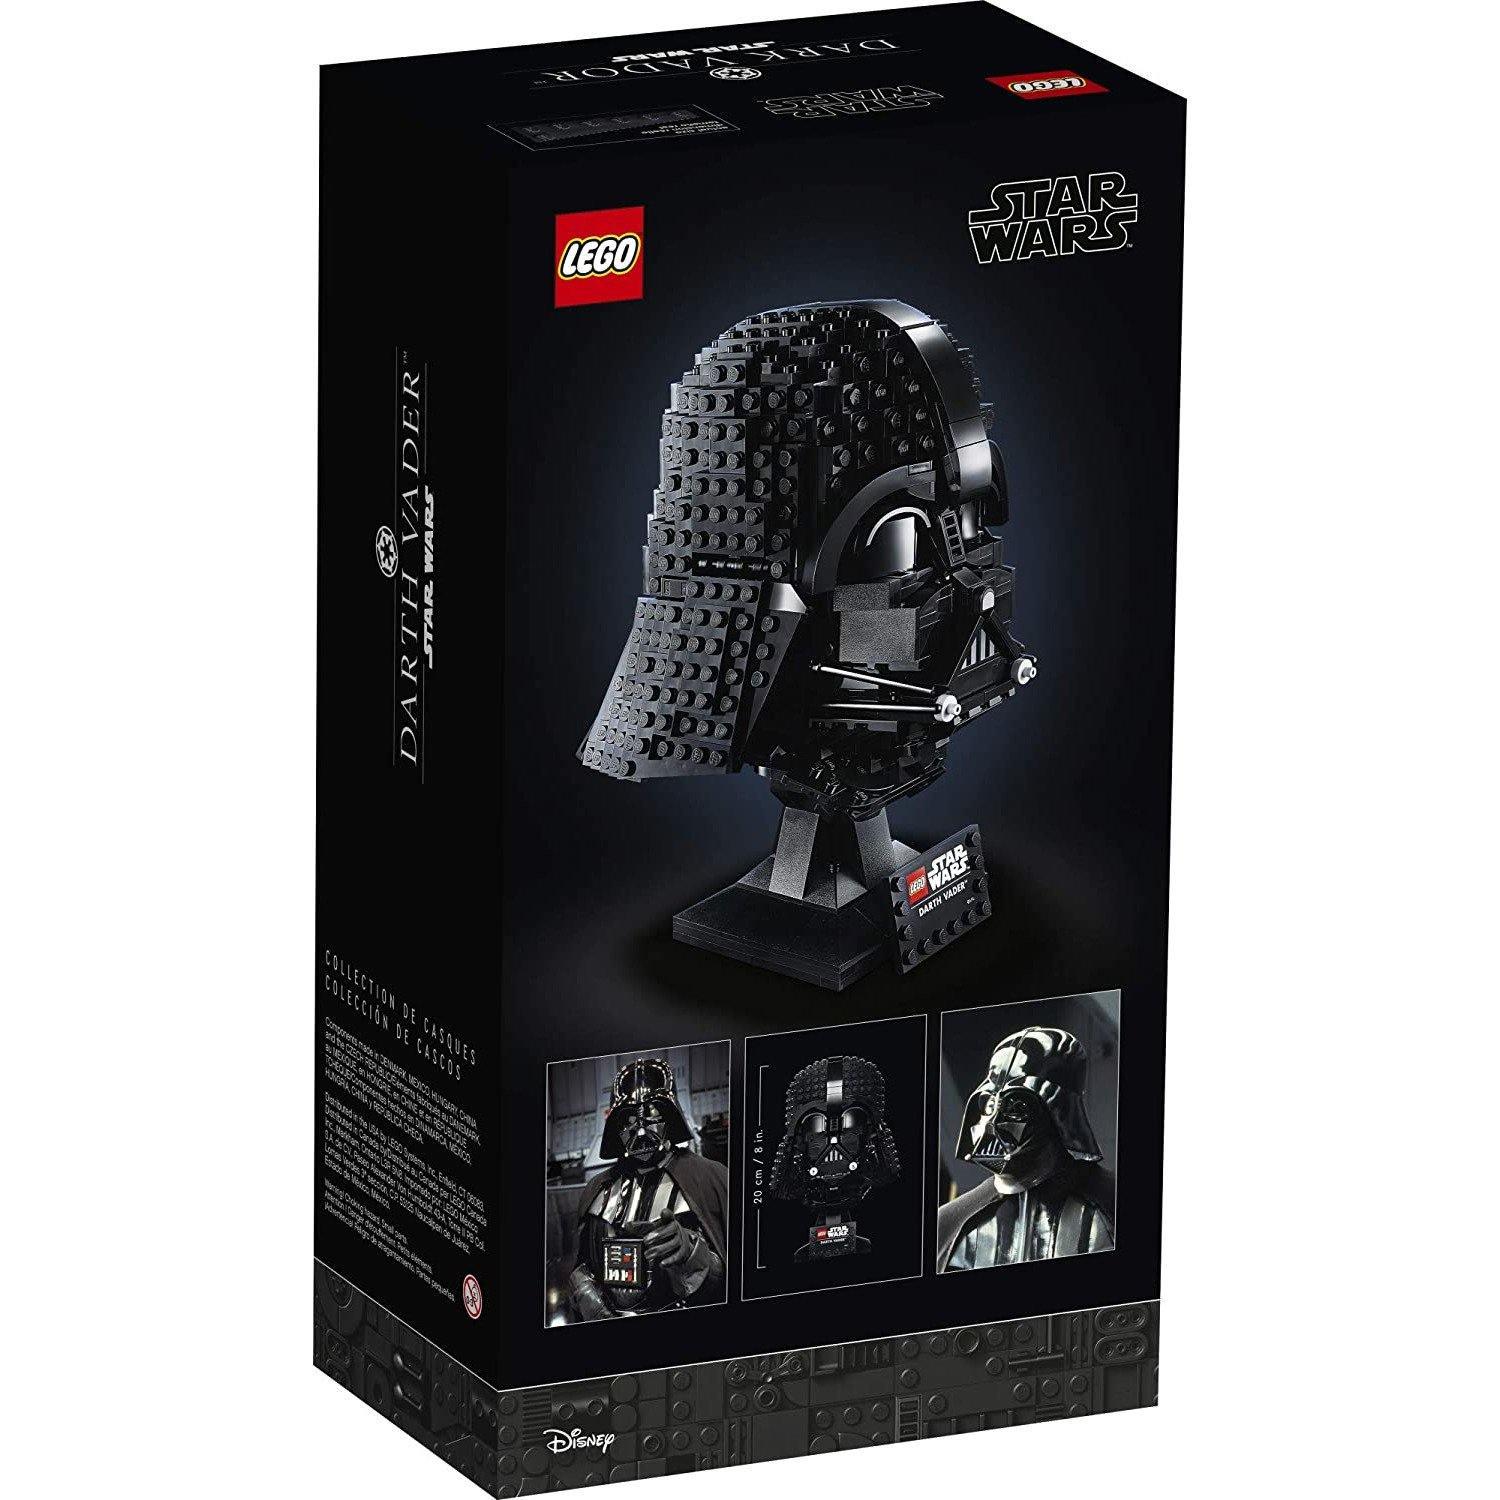 LEGO Star Wars 75304 Darth Vader Helmet (834 Pieces) Collectable - BumbleToys - 14 Years & Up, 18+, Boys, Darth Vader, LEGO, OXE, Pre-Order, star wars